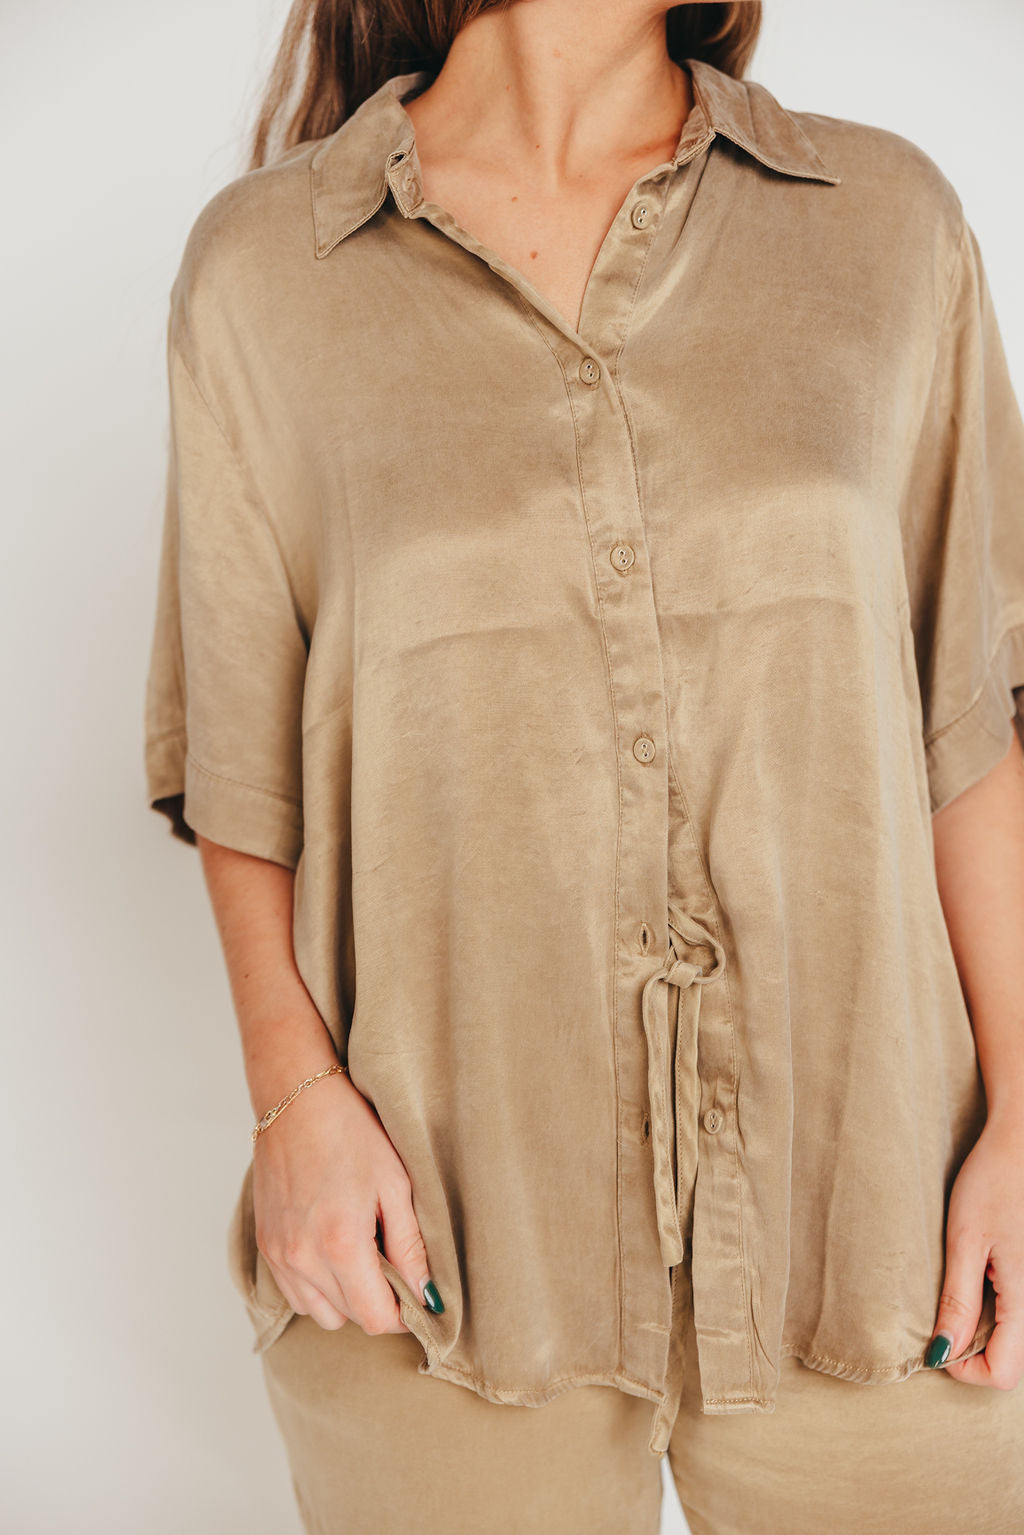 Axel Buttery Soft Button-Up Top in Toffee - Nursing Friendly